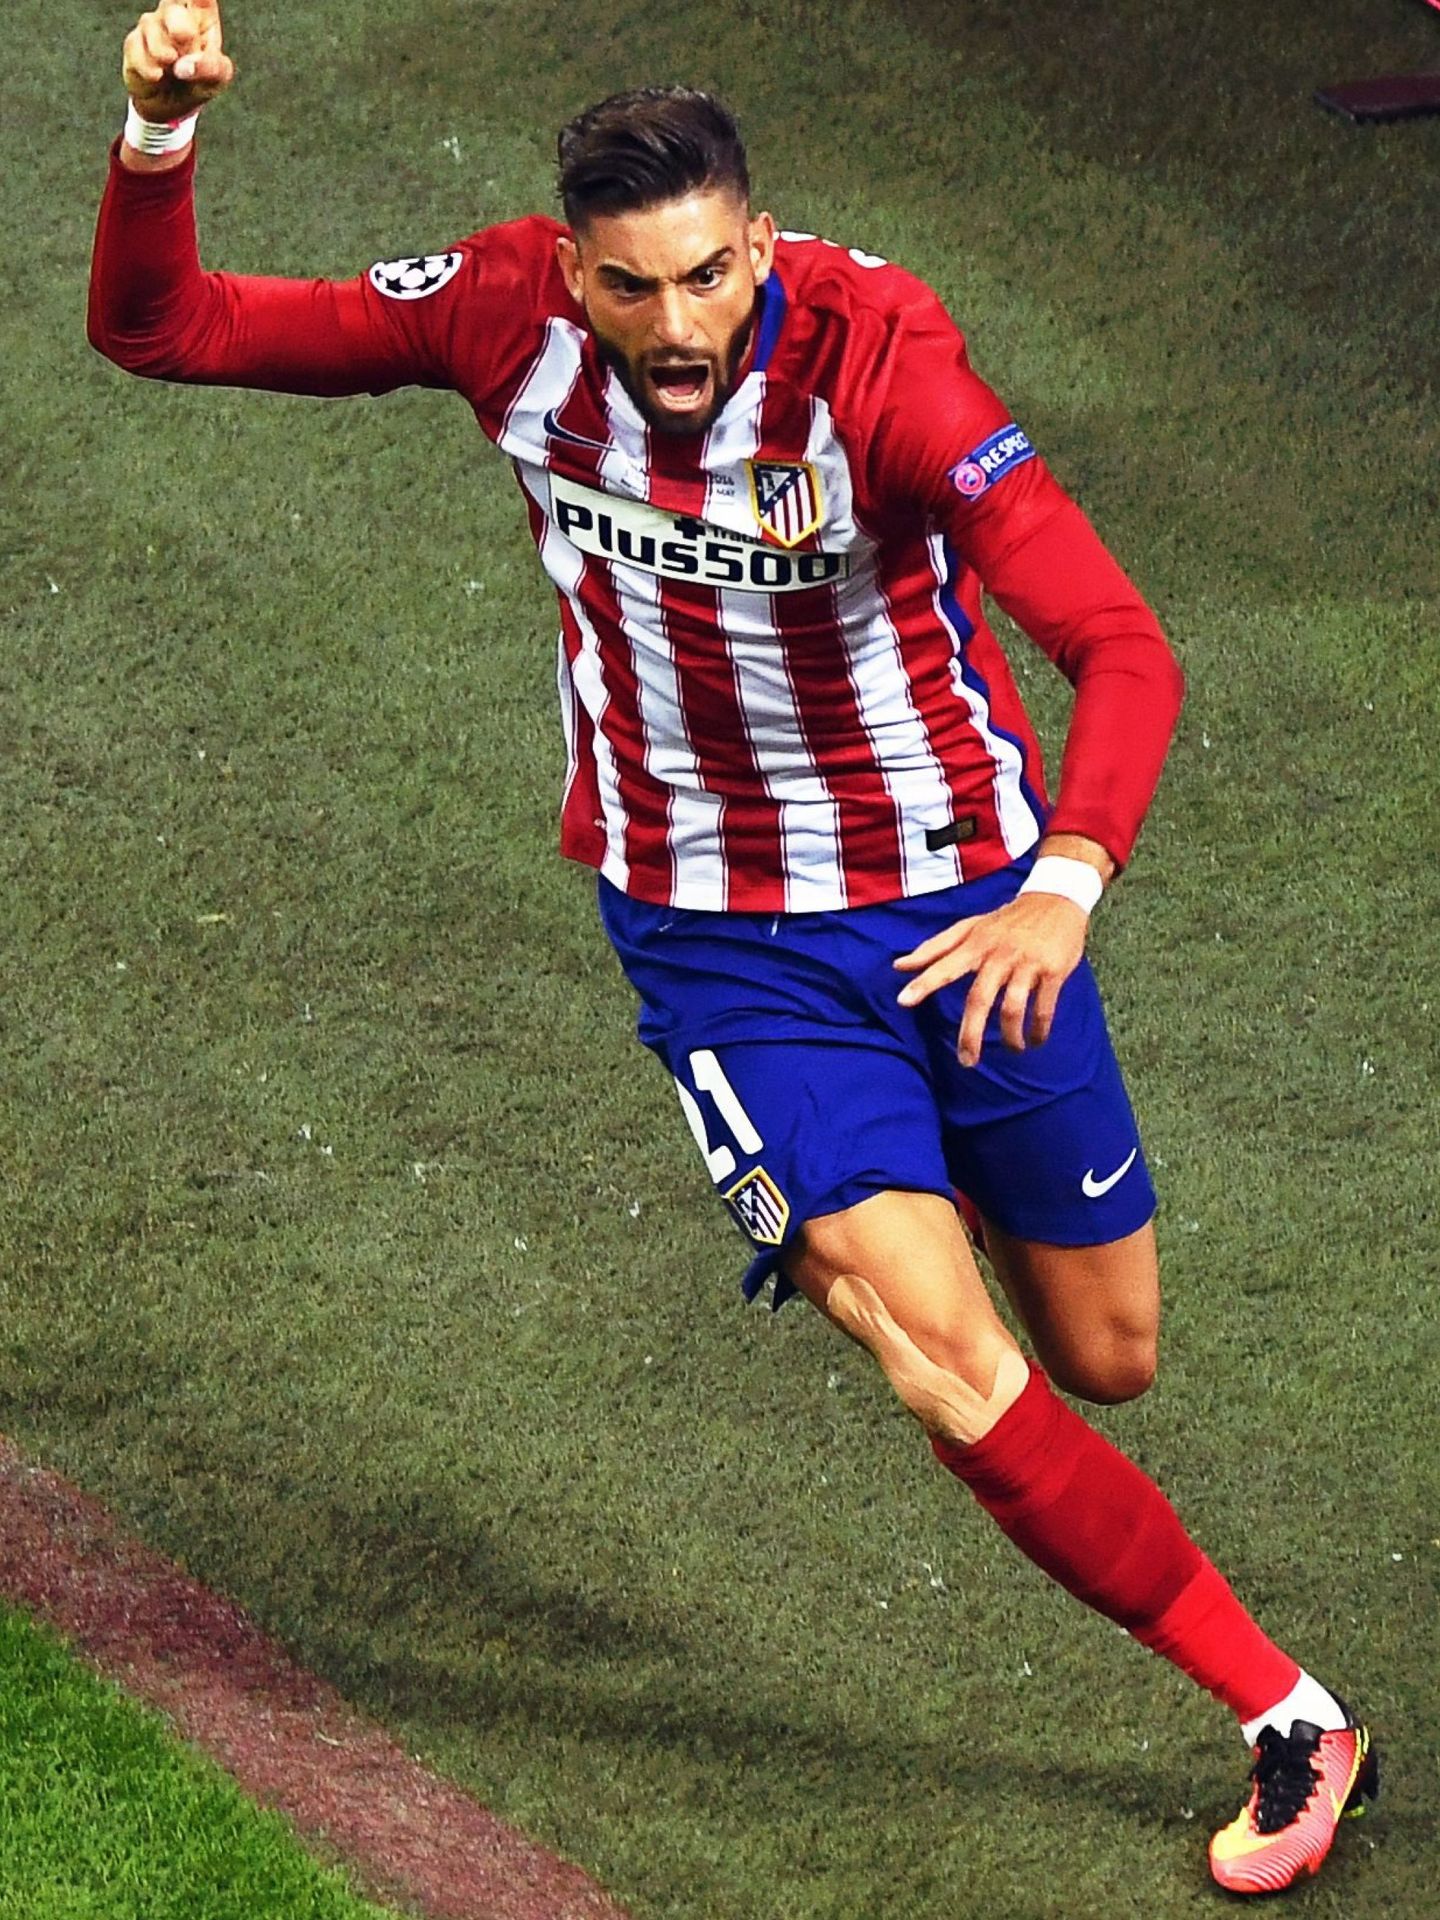 . Milan (Italy), 28 05 2016.- Atletico Madrid's Yannick Carrasco celebrates after scoring the 1-1 equalizer during the UEFA Champions League final between Real Madrid and Atletico Madrid at the Giuseppe Meazza Stadium in Milan, Italy, 28 May 2016. (Liga de Campeones, Italia) EFE EPA CHRISTIAN BRUNA